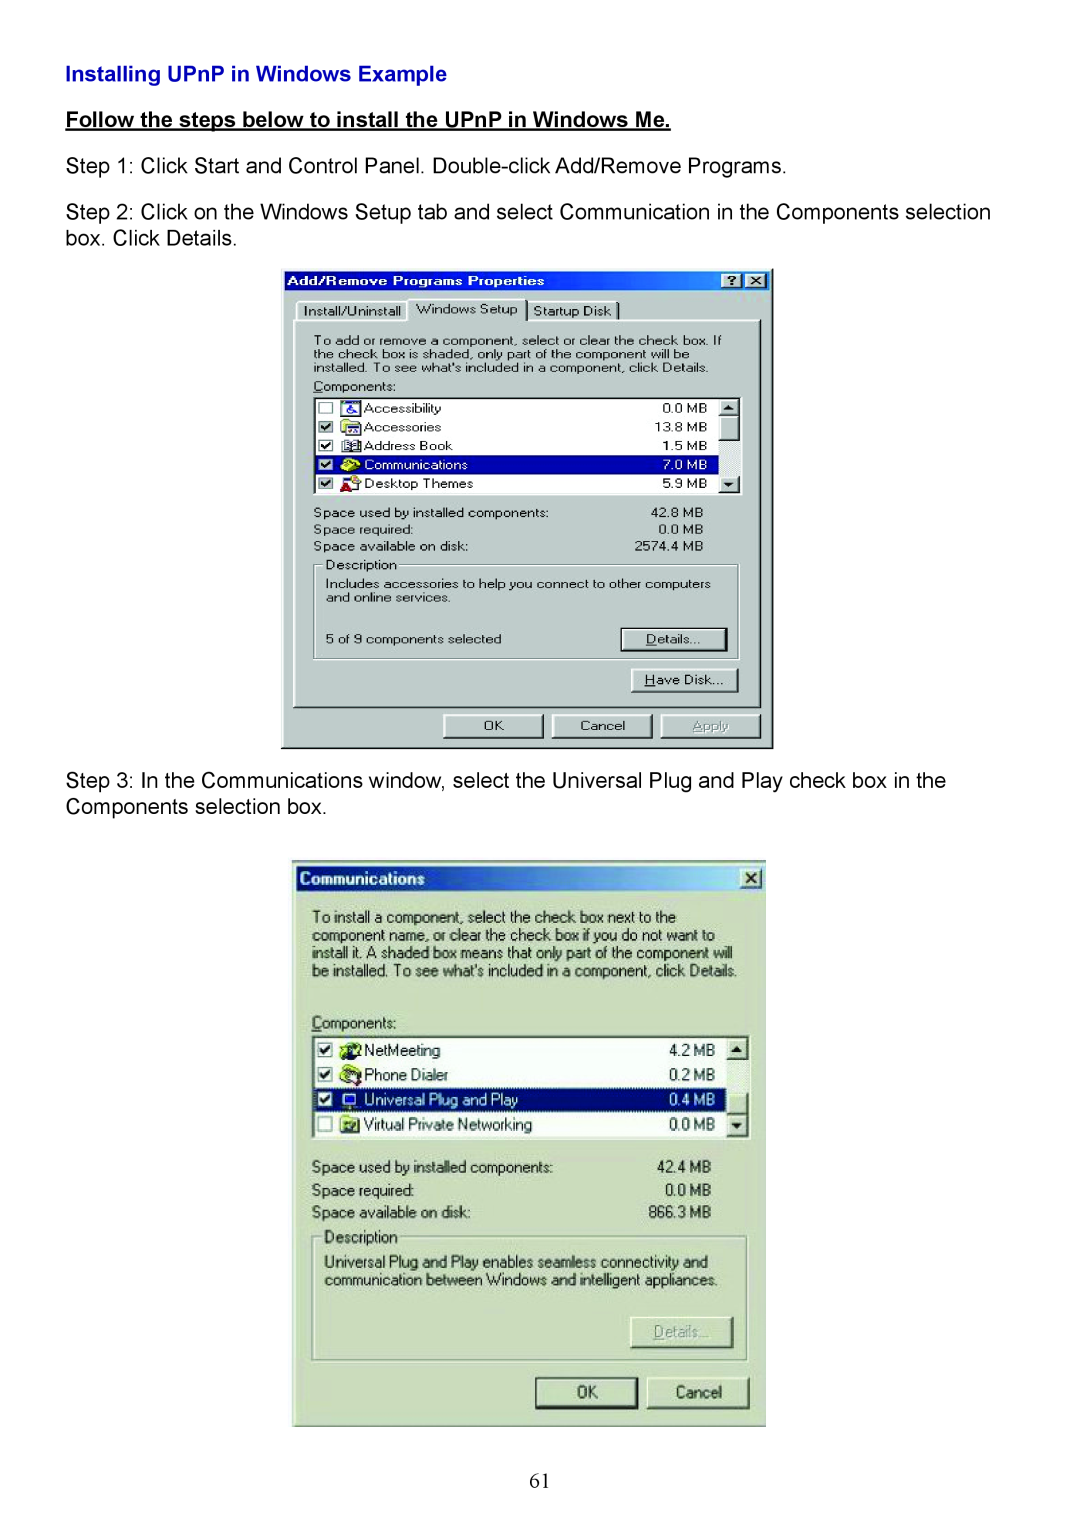 Billion Electric Company 7800 Installing UPnP in Windows Example, Follow the steps below to install the UPnP in Windows Me 